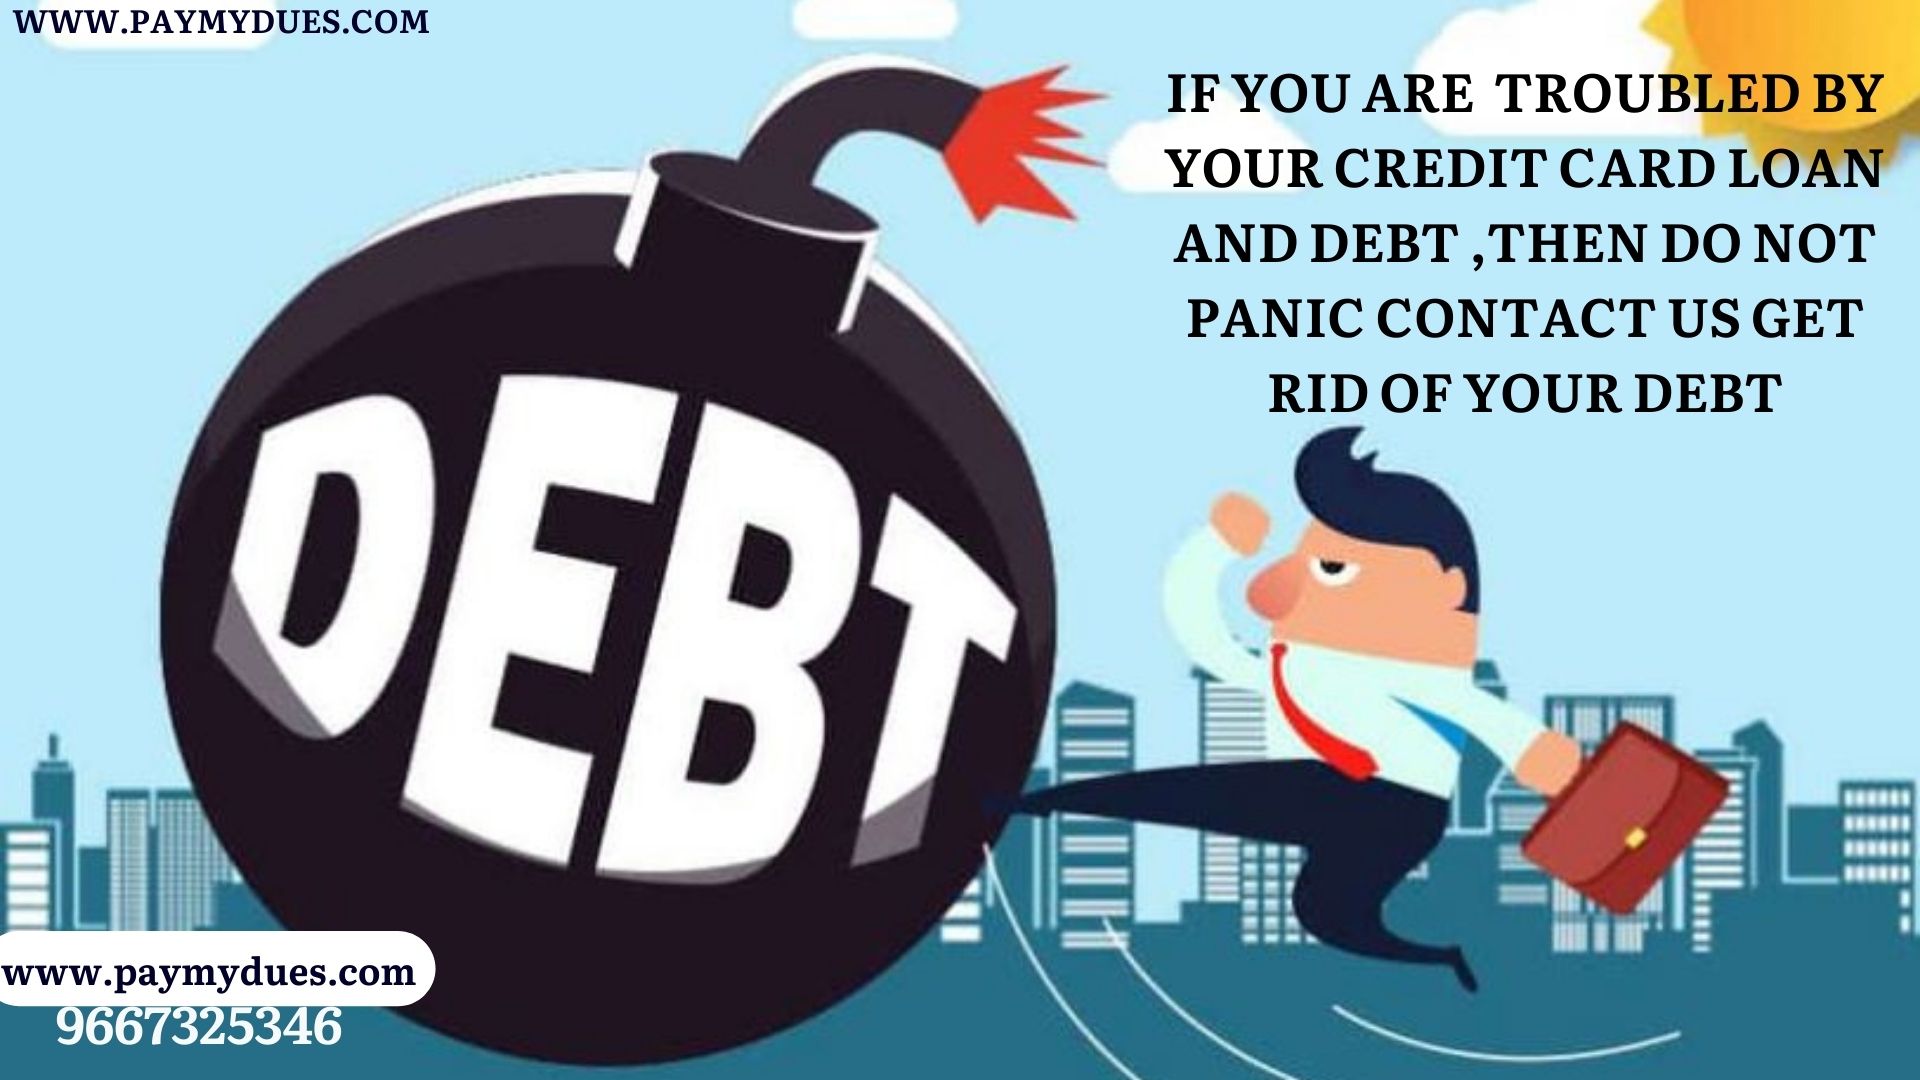 IF YOU ARE  TROUBLED BY YOUR CREDIT CARD LOAN AND DEBT